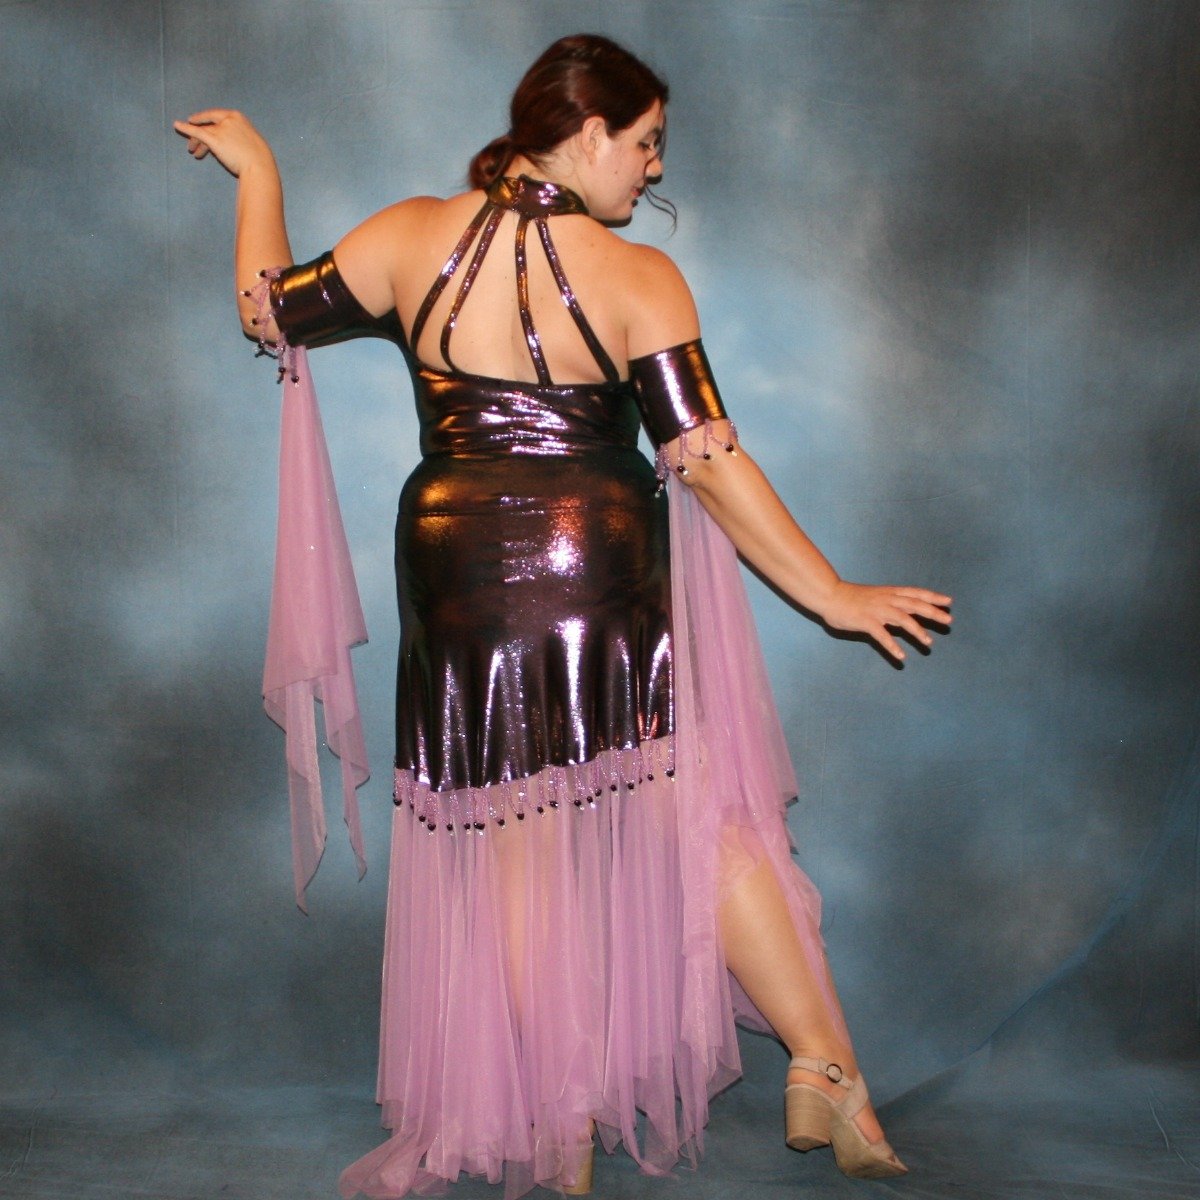 Crystal's Creations back view of  Metallic deep orchid/purple theatrical ballroom dress created in deep orchid/purple metallic lycra with orchid tricot chiffon panel skirt & floats, embellished with orchid Swarovski rhinestone work in bodice, along with hand beading at skirt edge & arm bands.